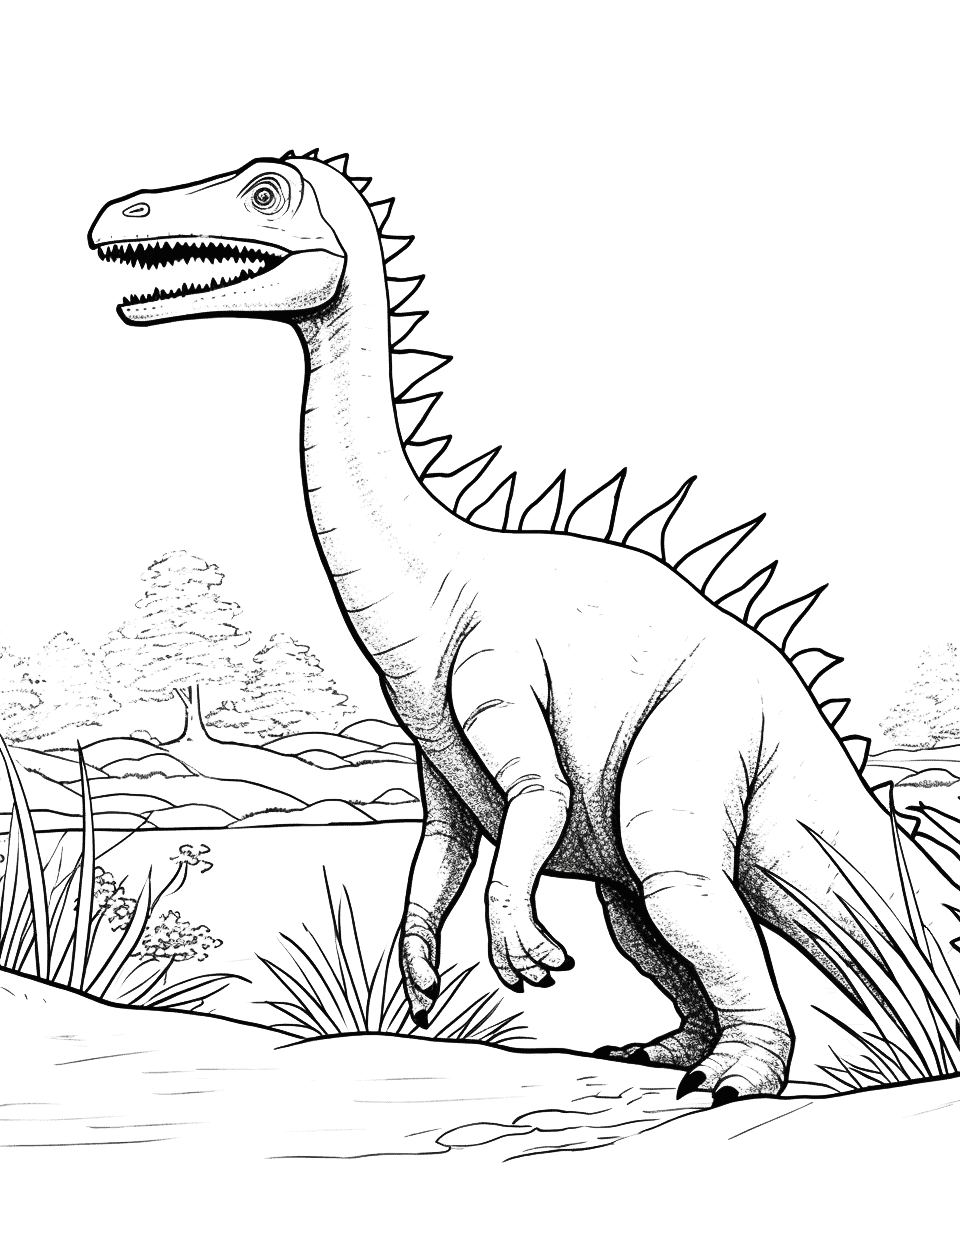 How to Draw Cartoon Dinosaurs & Realistic Dinosaurs : Drawing Tutorials &  Drawing & How to Draw Dinosaurs Drawing Lessons Step by Step Techniques for  Cartoons & Illustrations